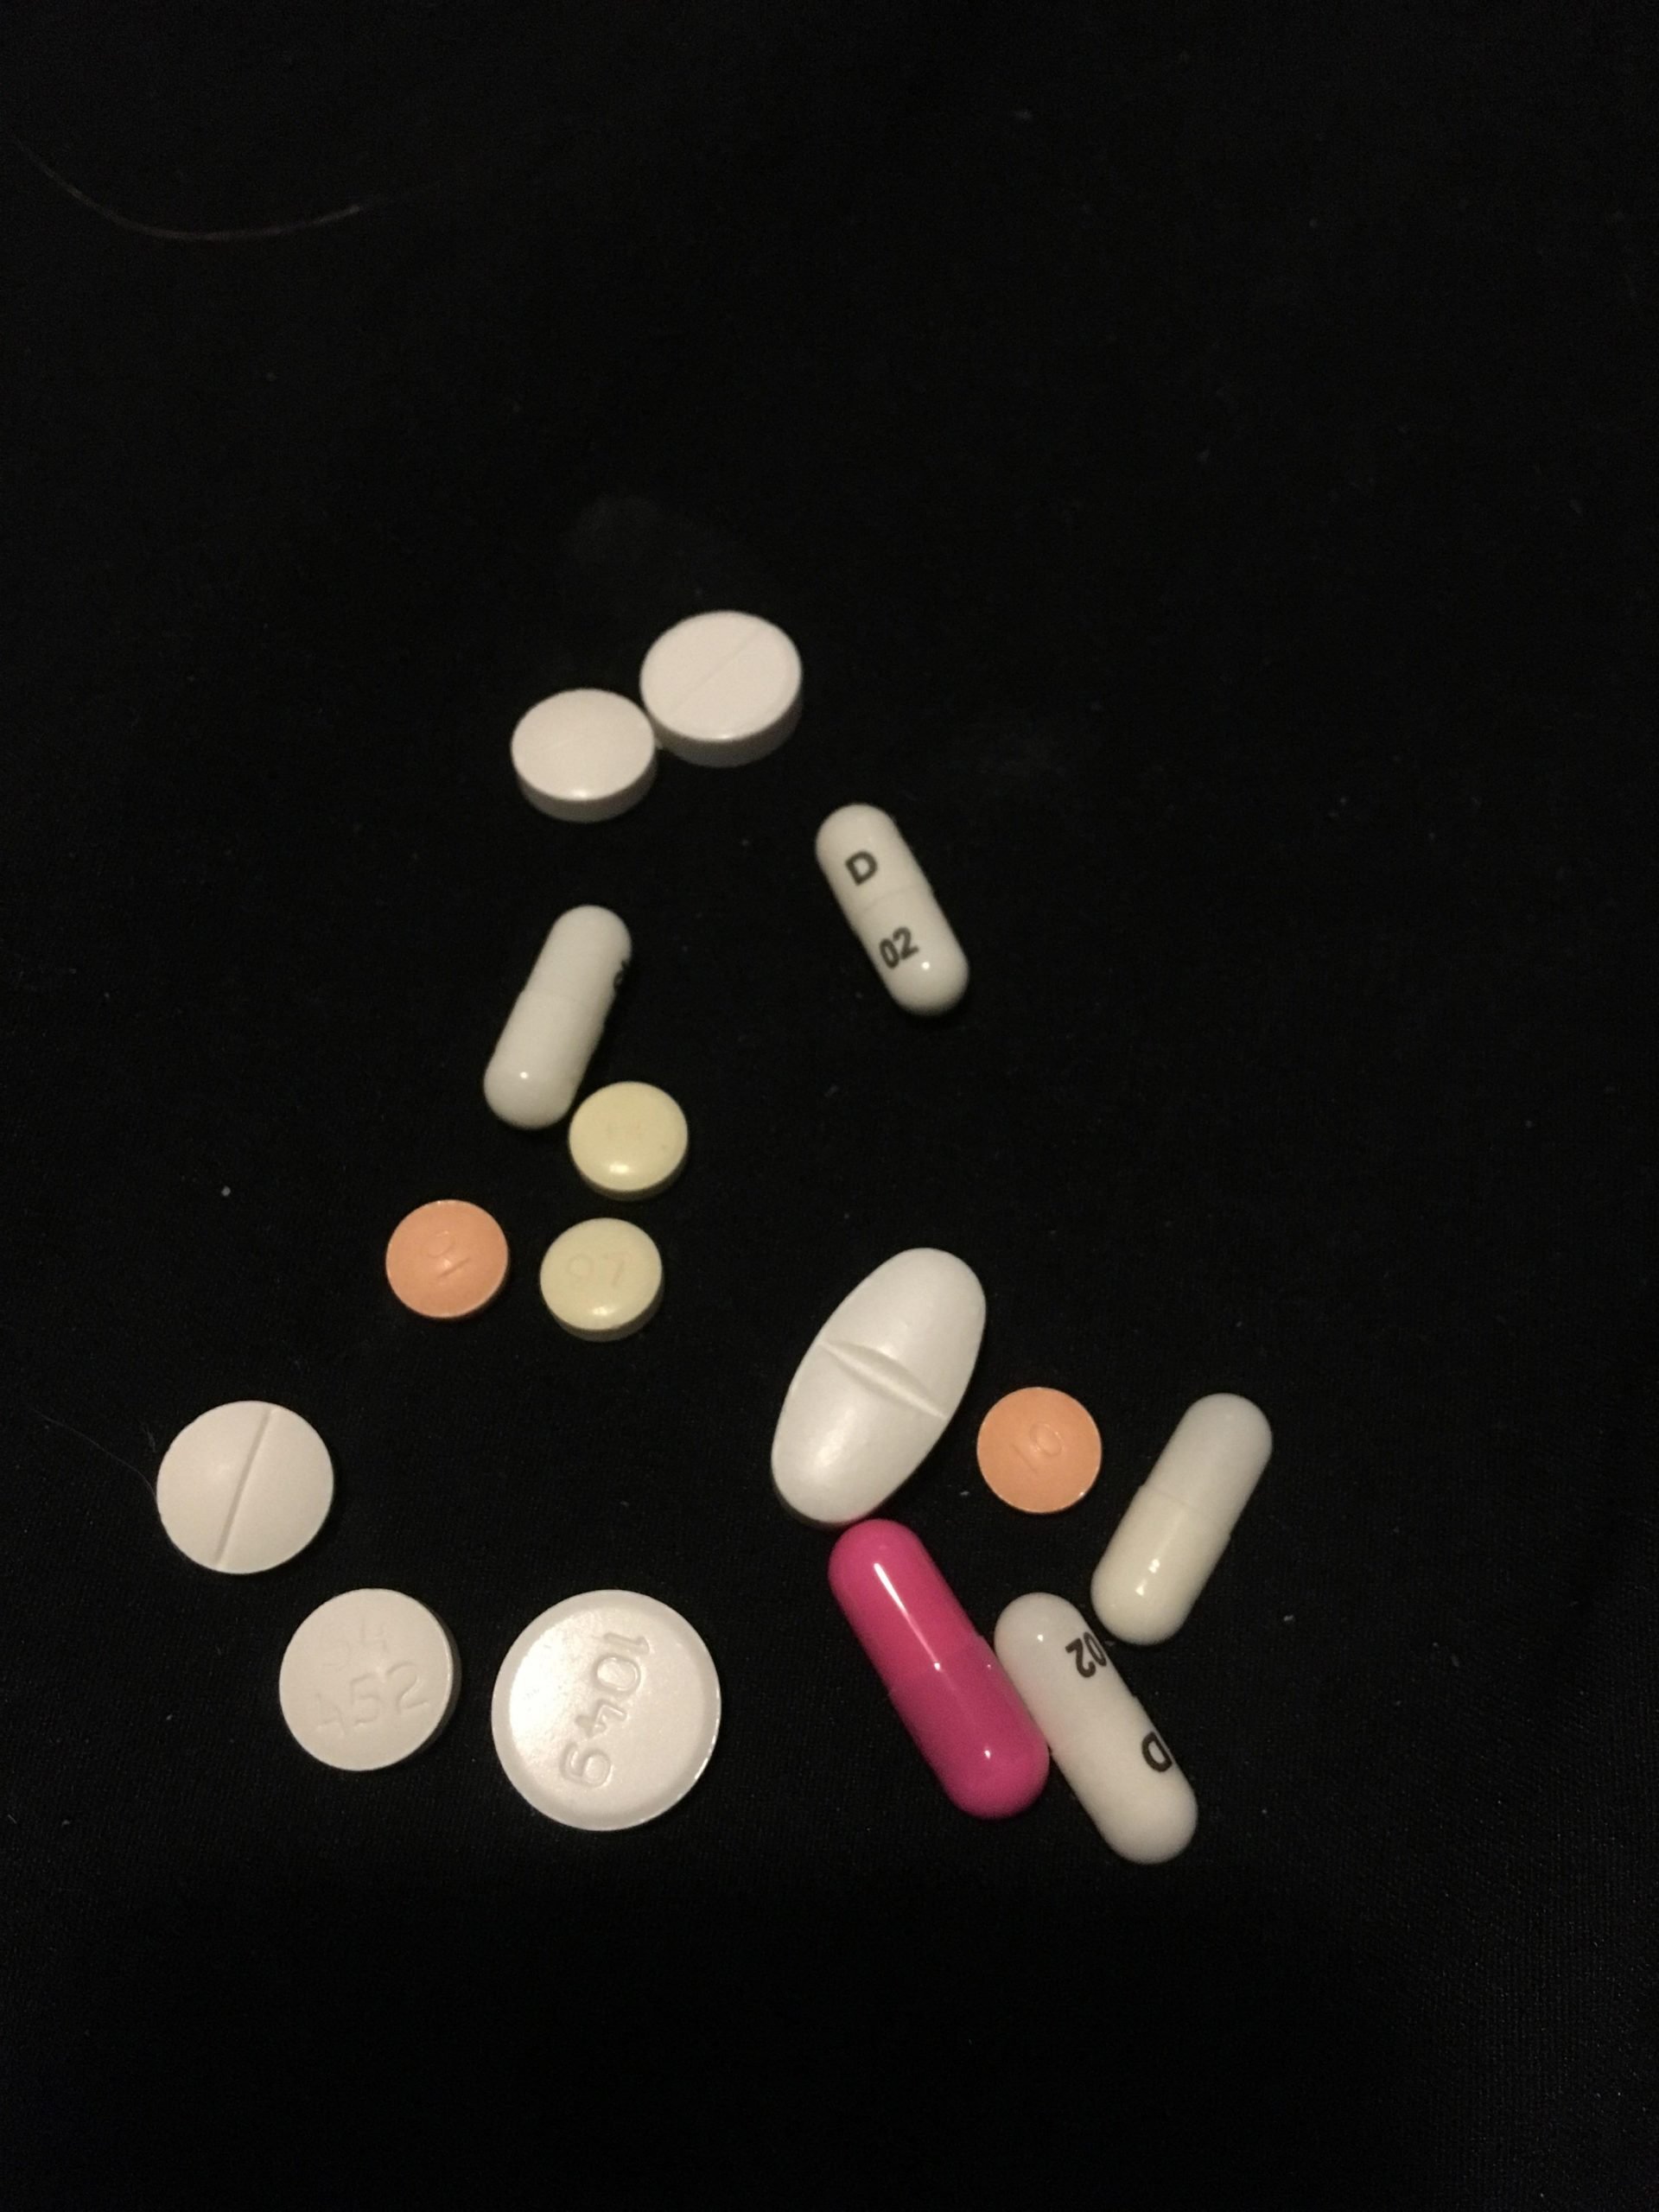 Anyone else taking a handful of pills everyday? : bipolar